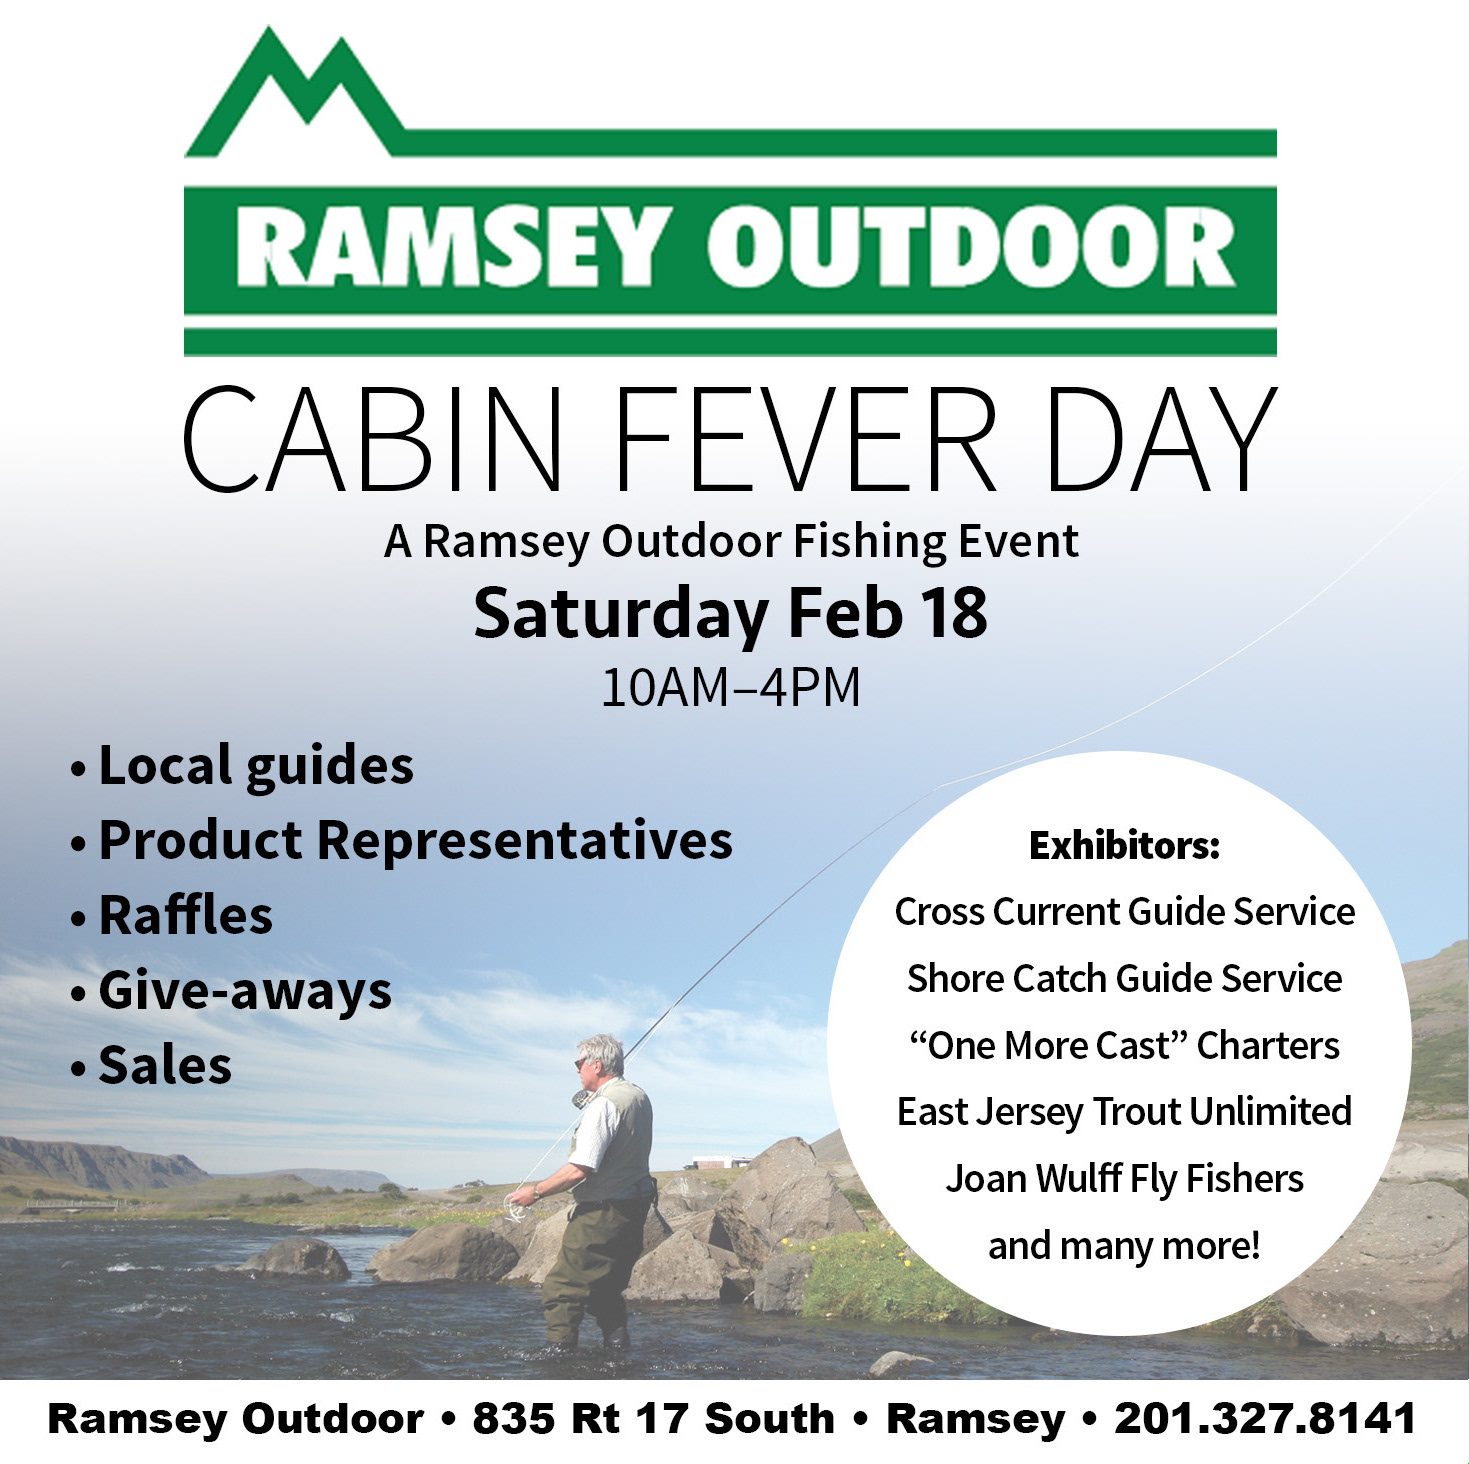 2017 Ramsey Outdoor Cabin Fever Day - East Jersey Trout Unlimited